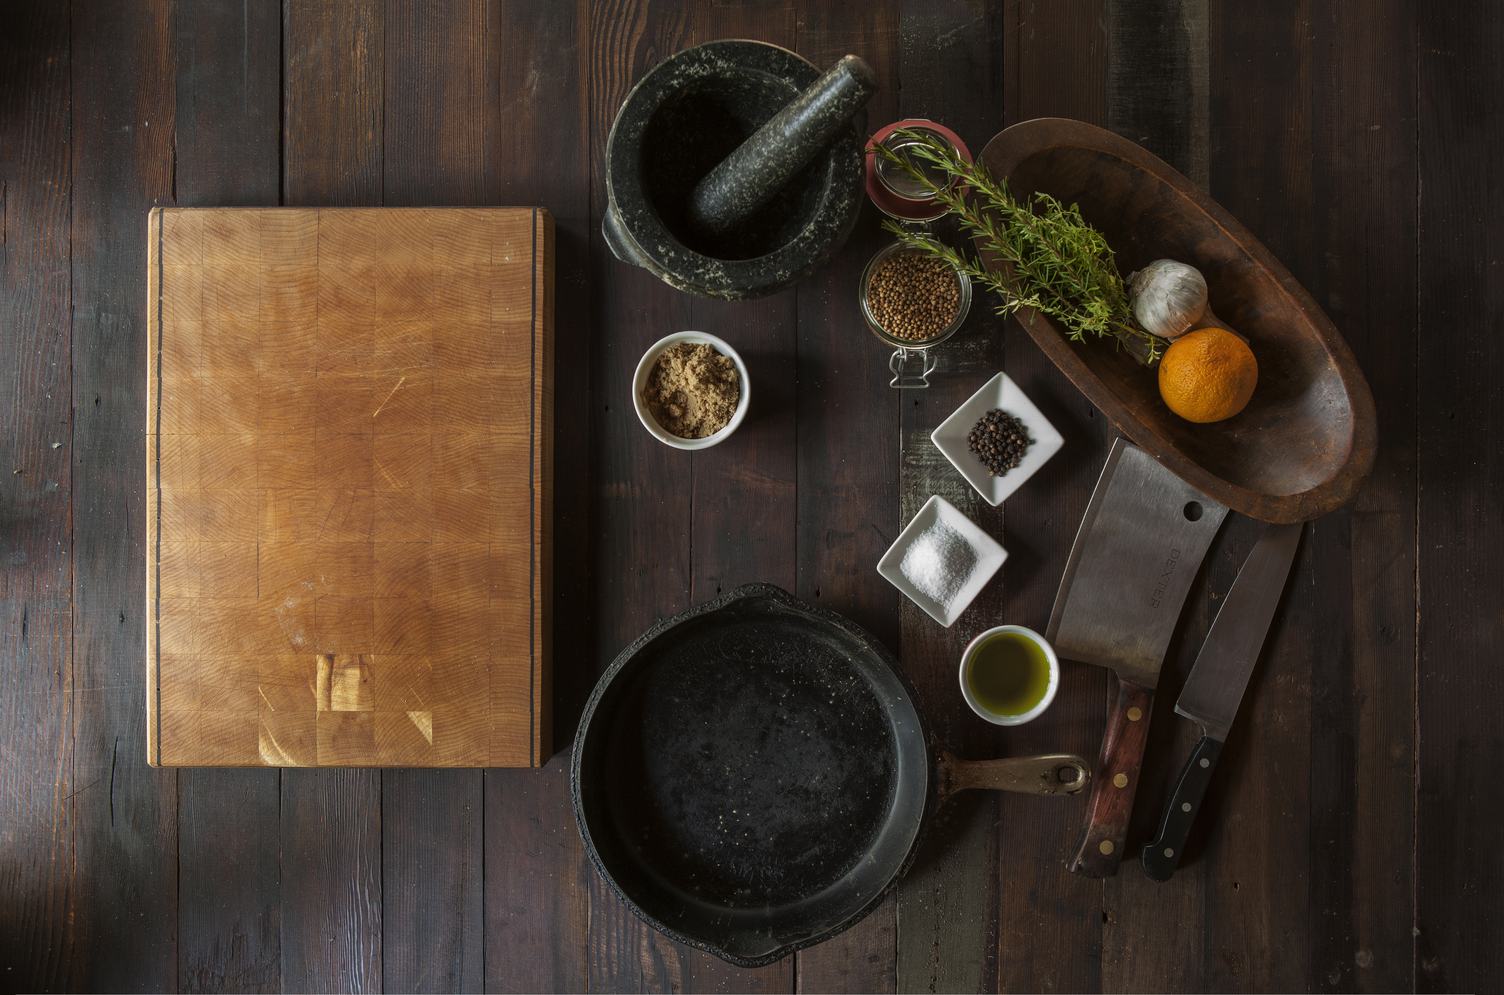 Cutting Board, Pan, Mortar and Spices - Cuisine Flatlay